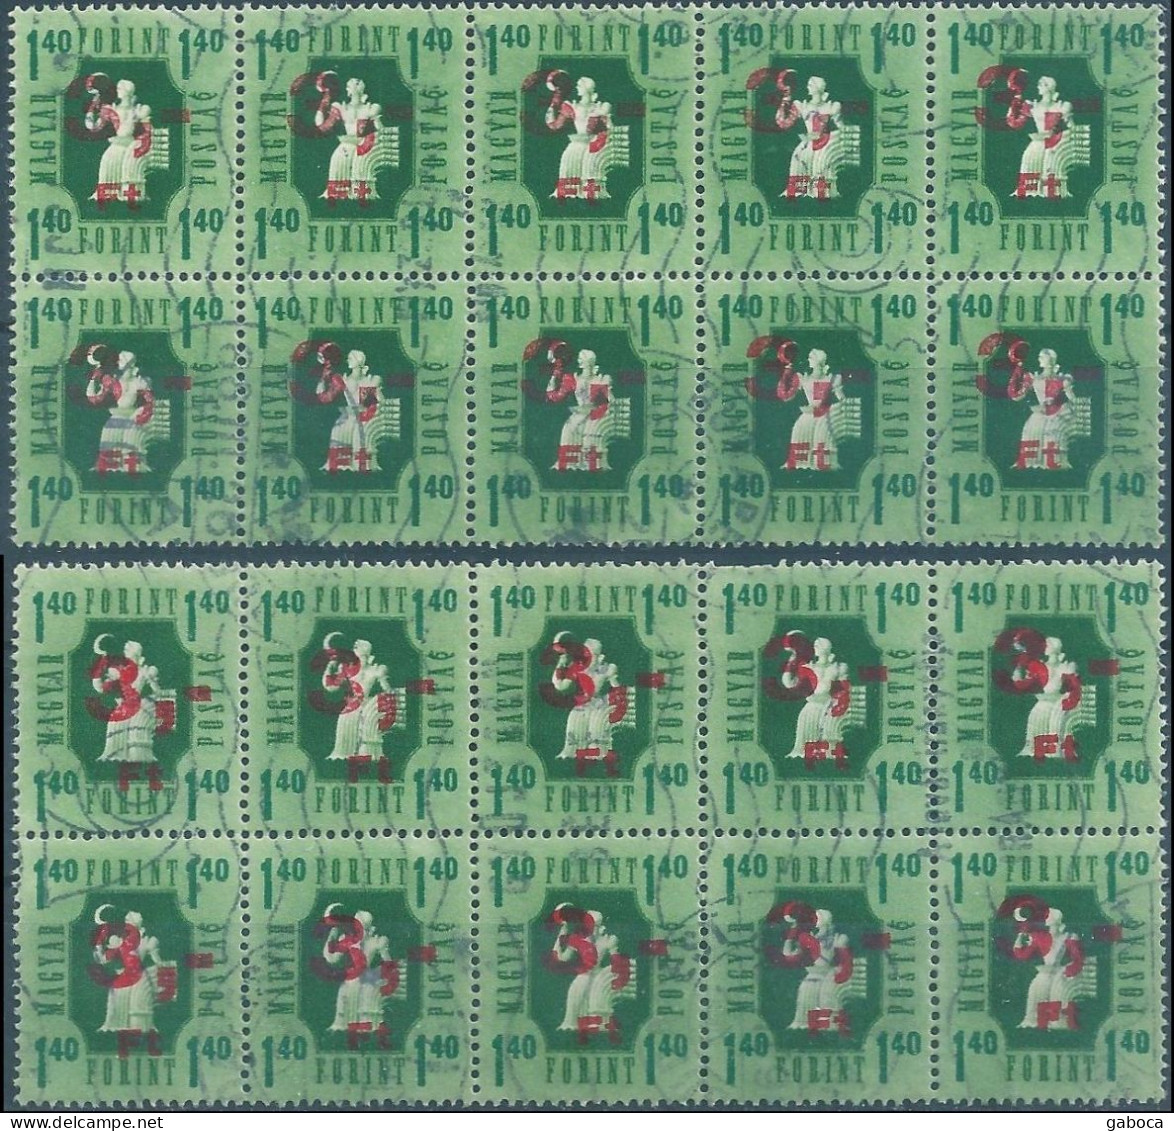 C5903 Hungary Parcel Stamp Agriculture Harvest Ovprnt Plate Block Of 10 Used 2xERROR - Correo Postal